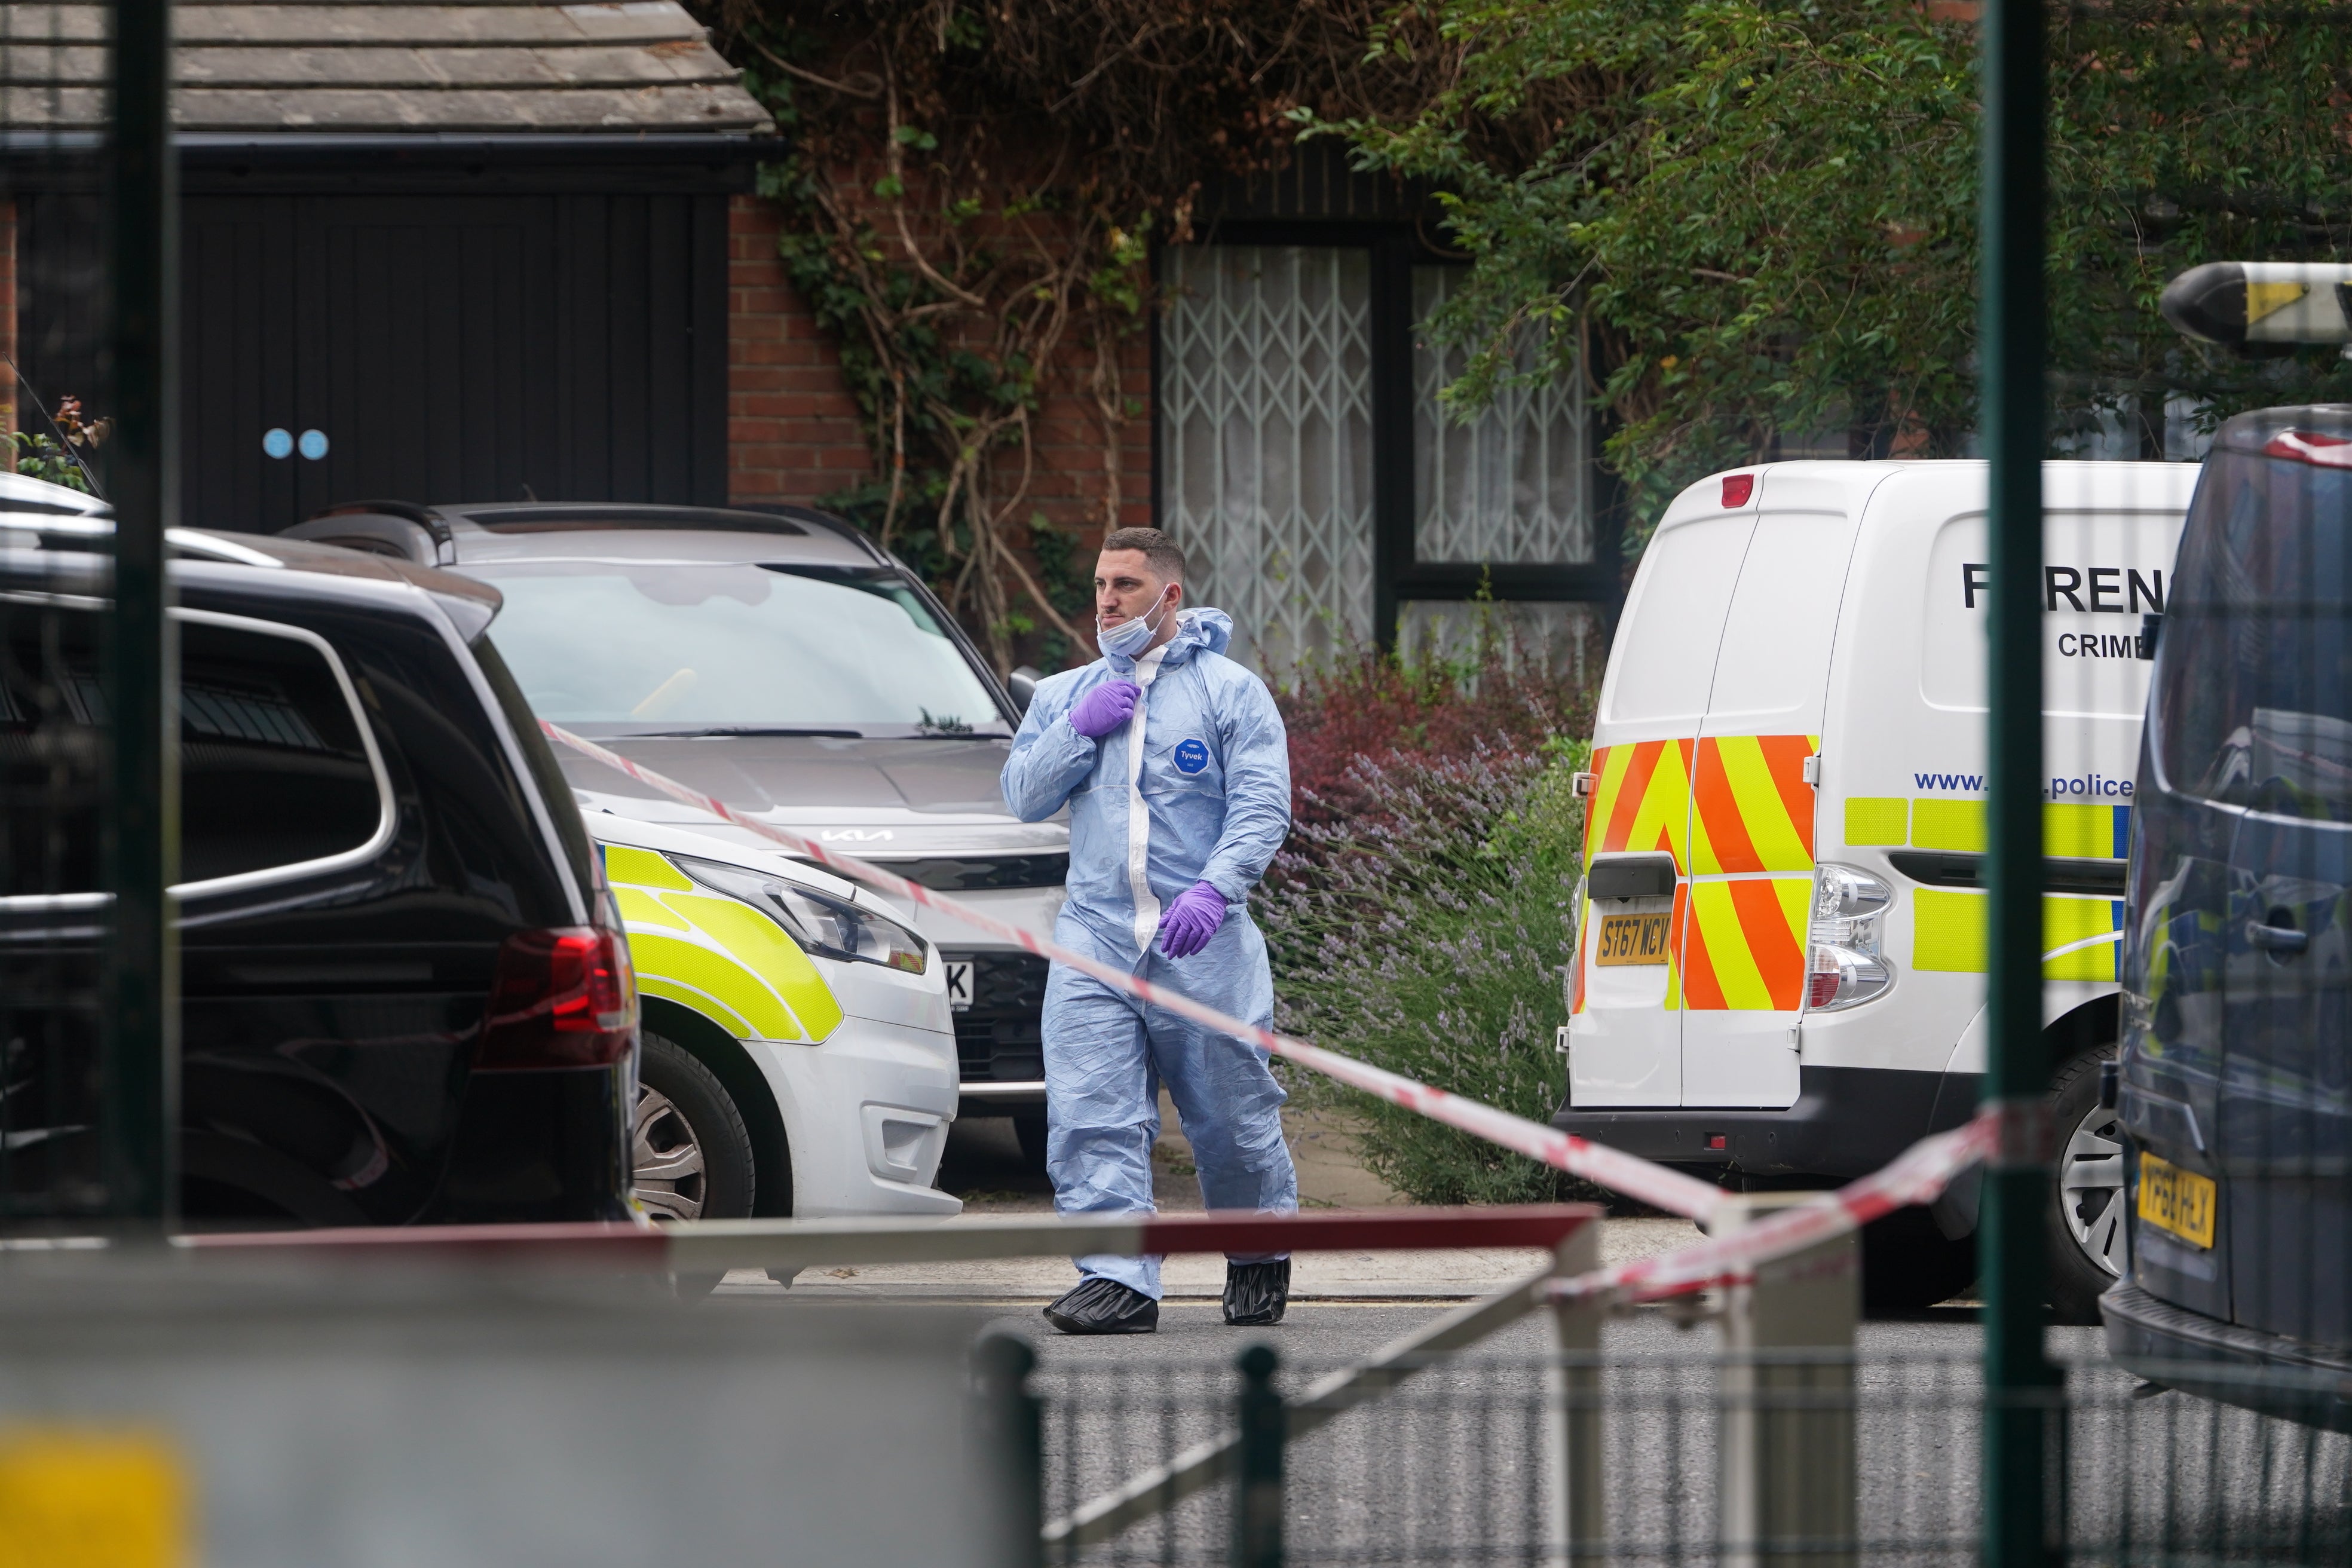 A forensic officer at an address in Shepherd’s Bush, west London, searches believed to be in connection with the human remains found in Bristol